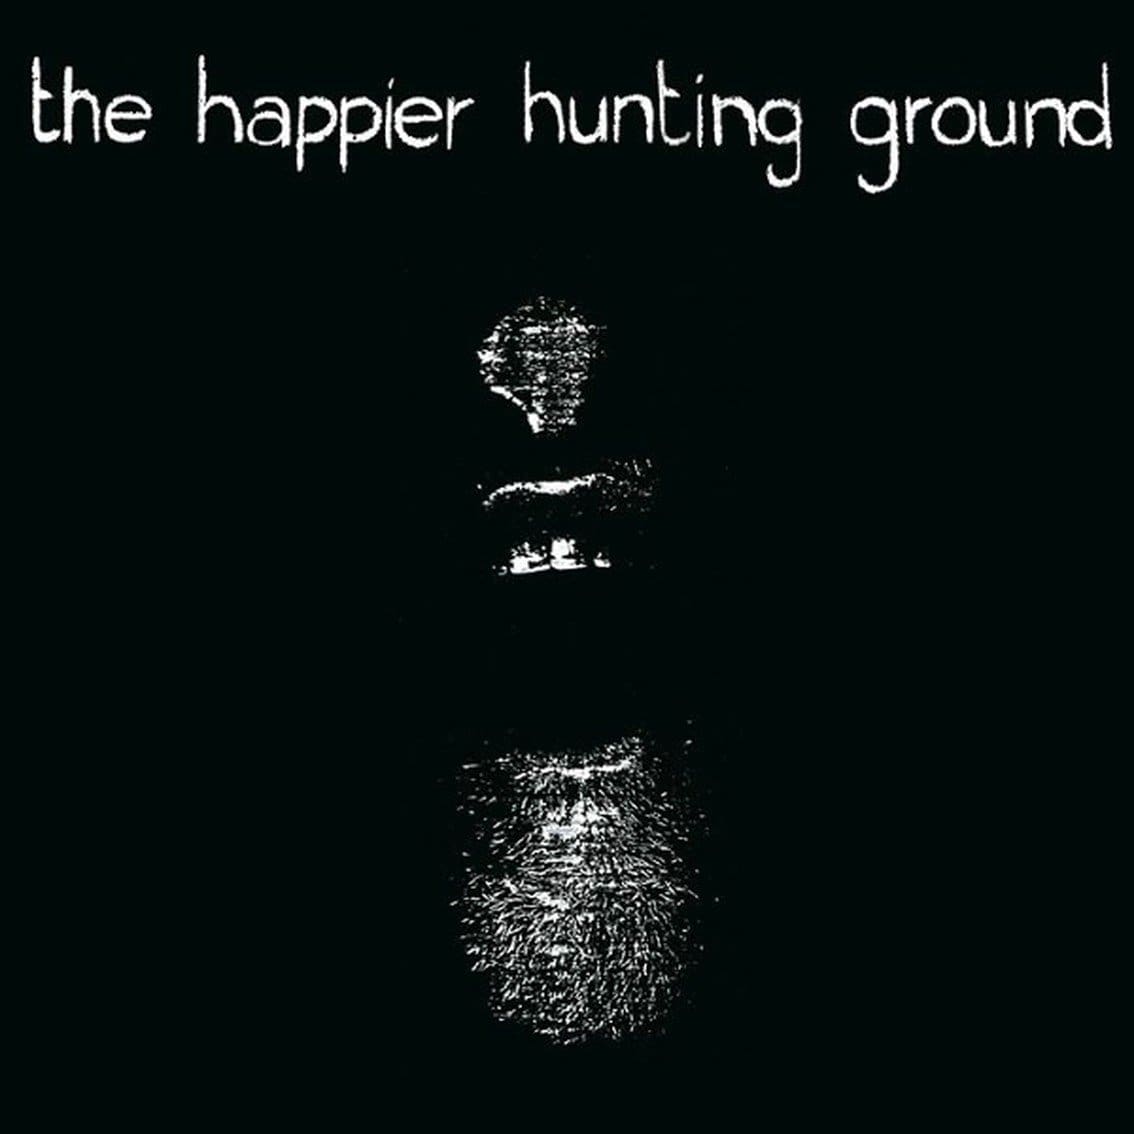 Split vinyl album for The Happy Hunting Ground & Phantom Limb (CD included) - limited edition of 500 copies